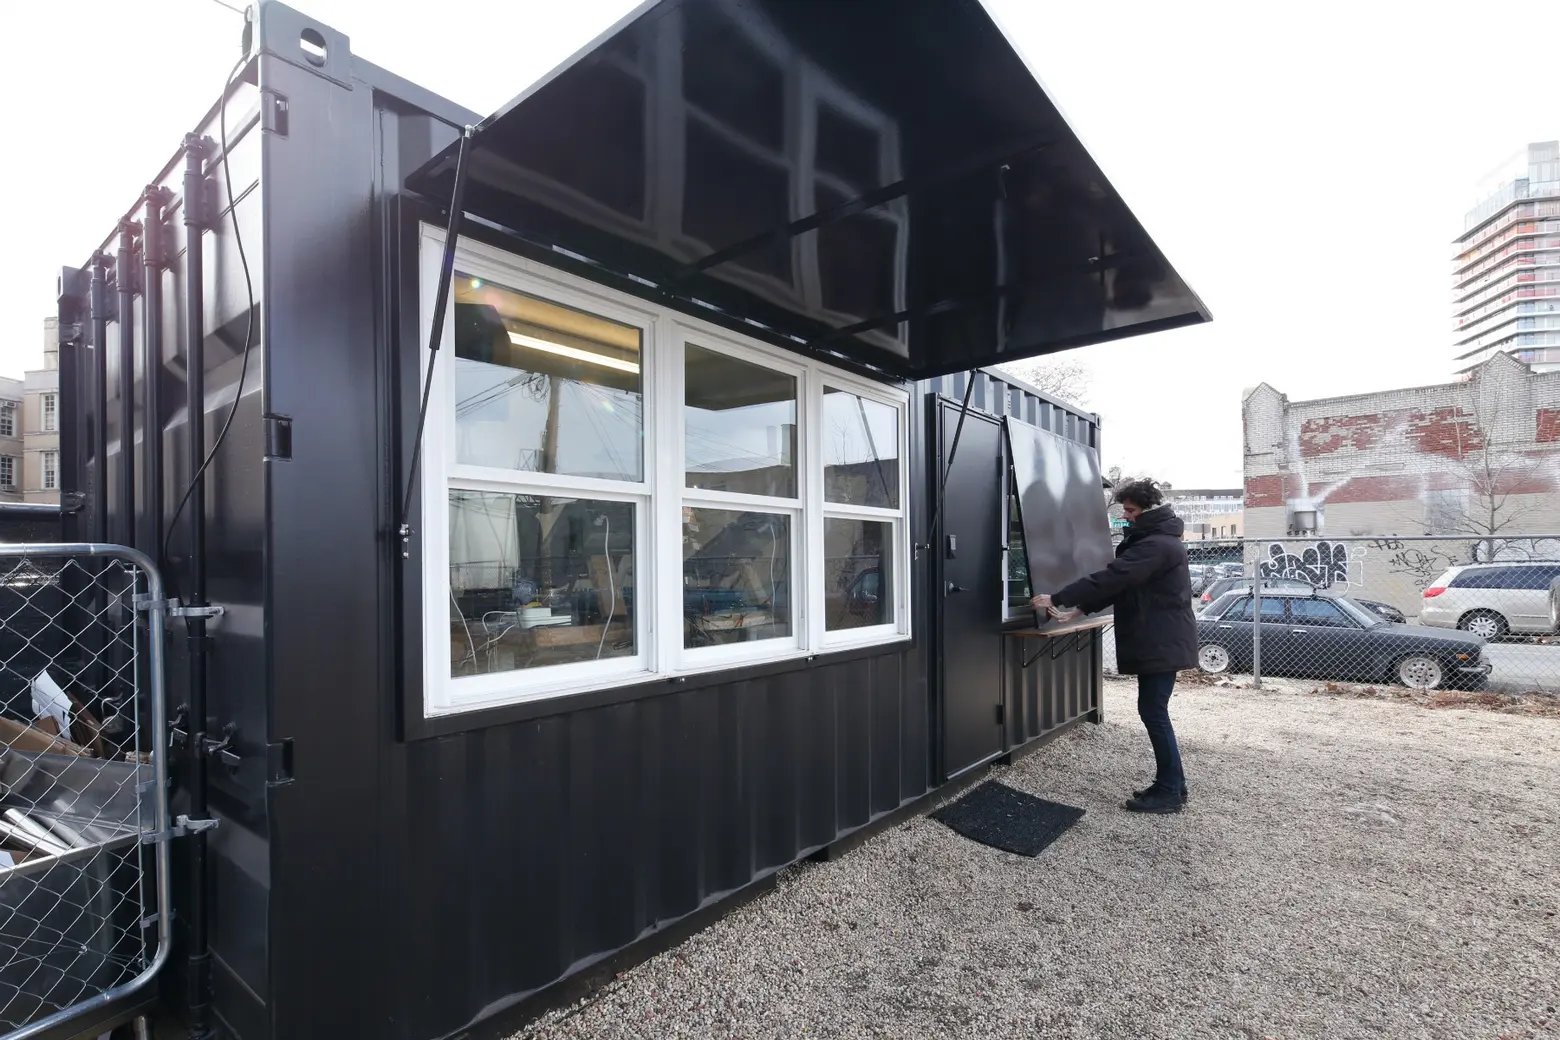 The Lot Radio, François Vaxelaire, Brooklyn radio station, independent radio, shipping container radio